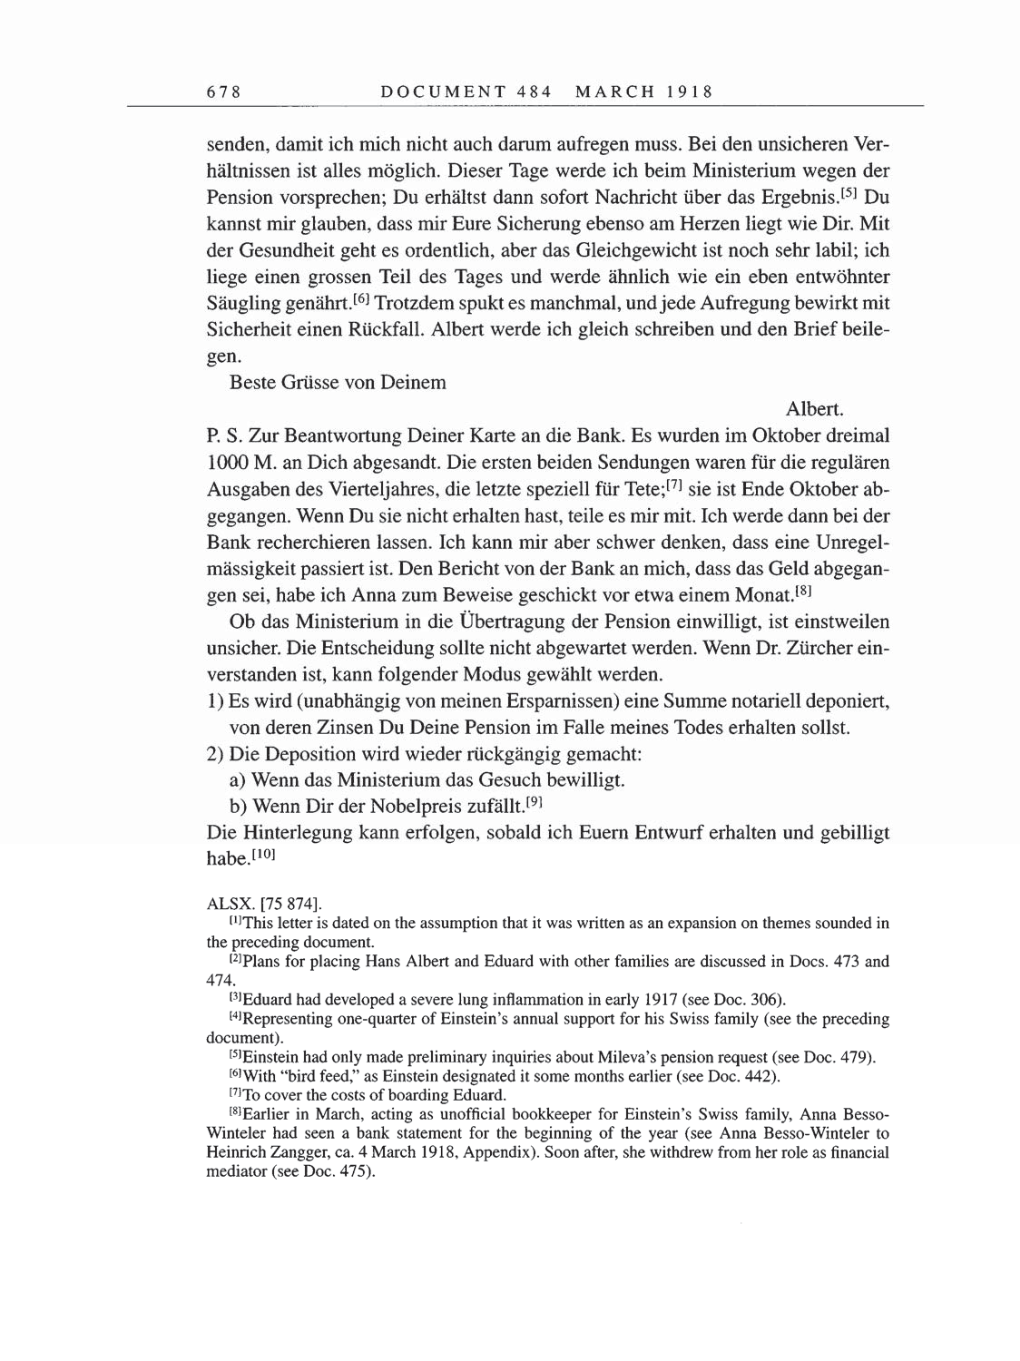 Volume 8, Part B: The Berlin Years: Correspondence 1918 page 678